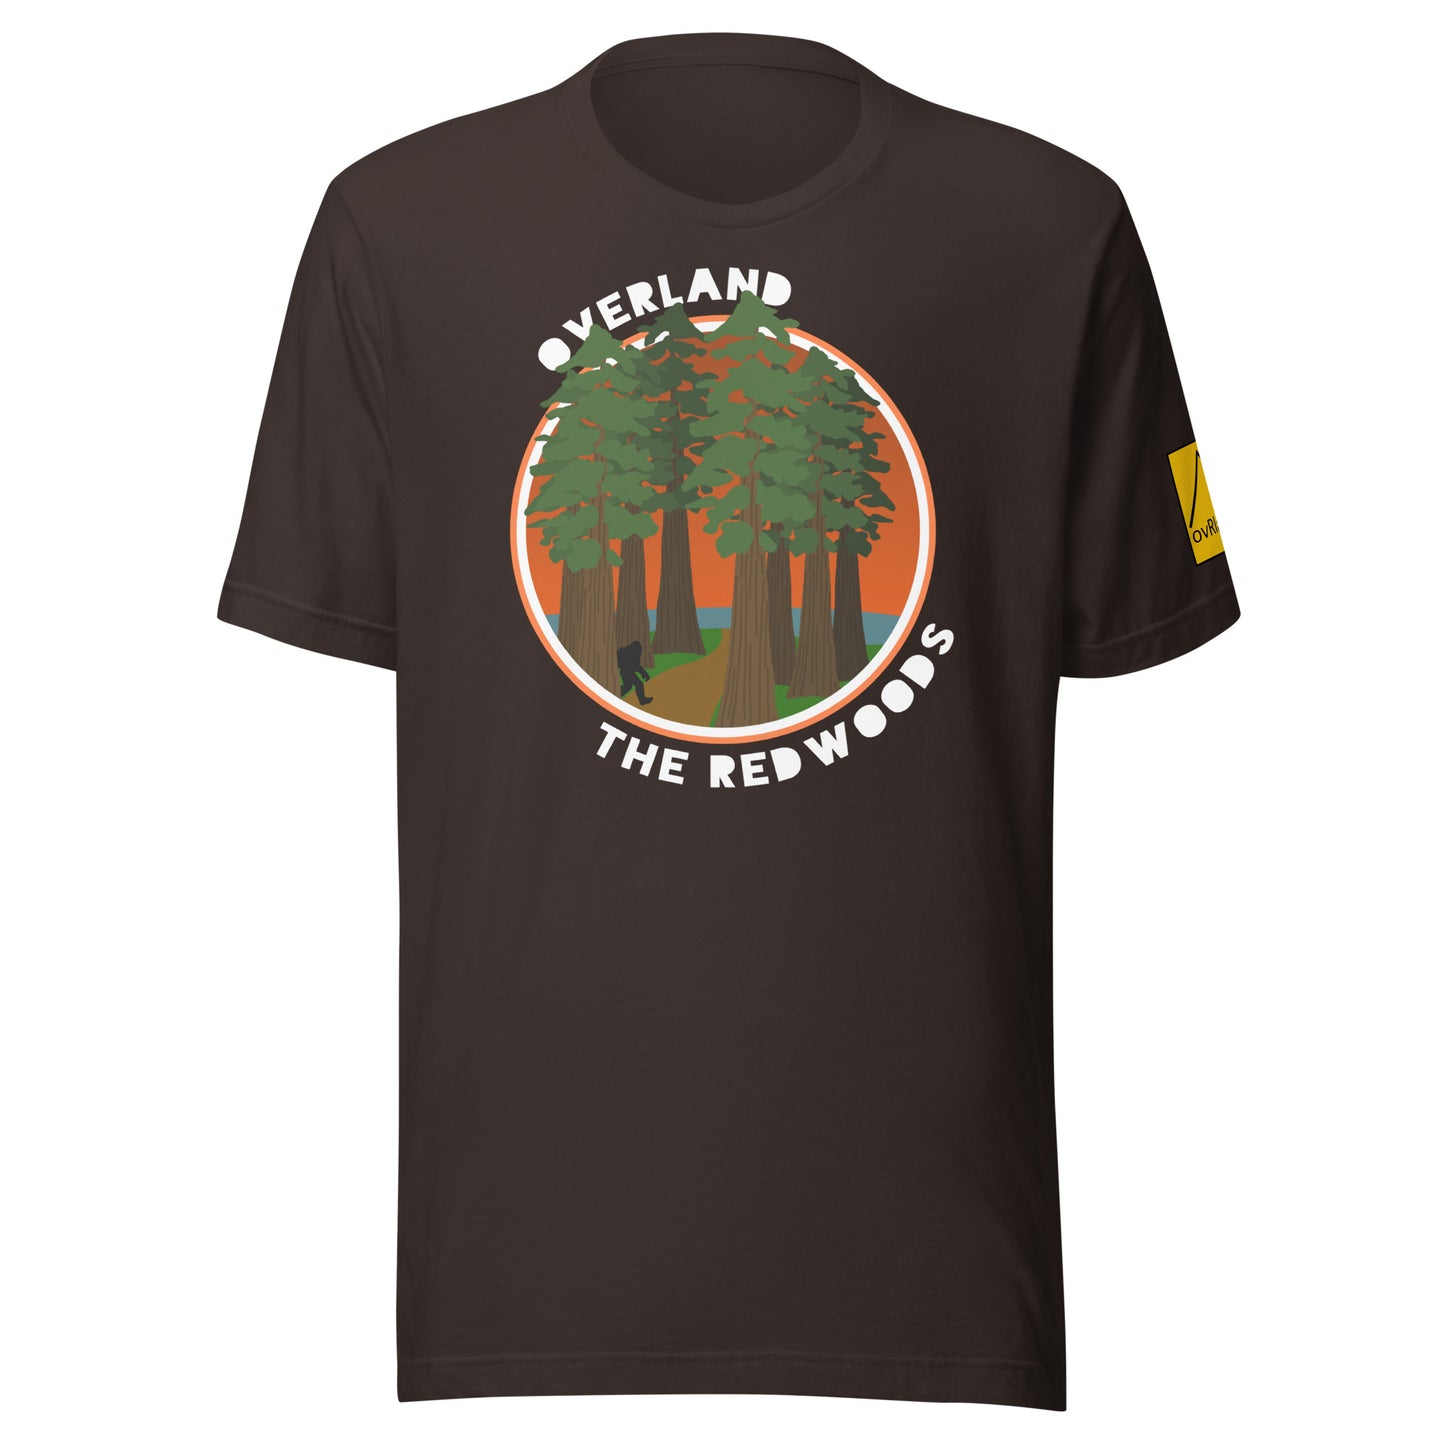 Overland the Redwoods. Bigfoot country. Brown t-shirt. overland365.com